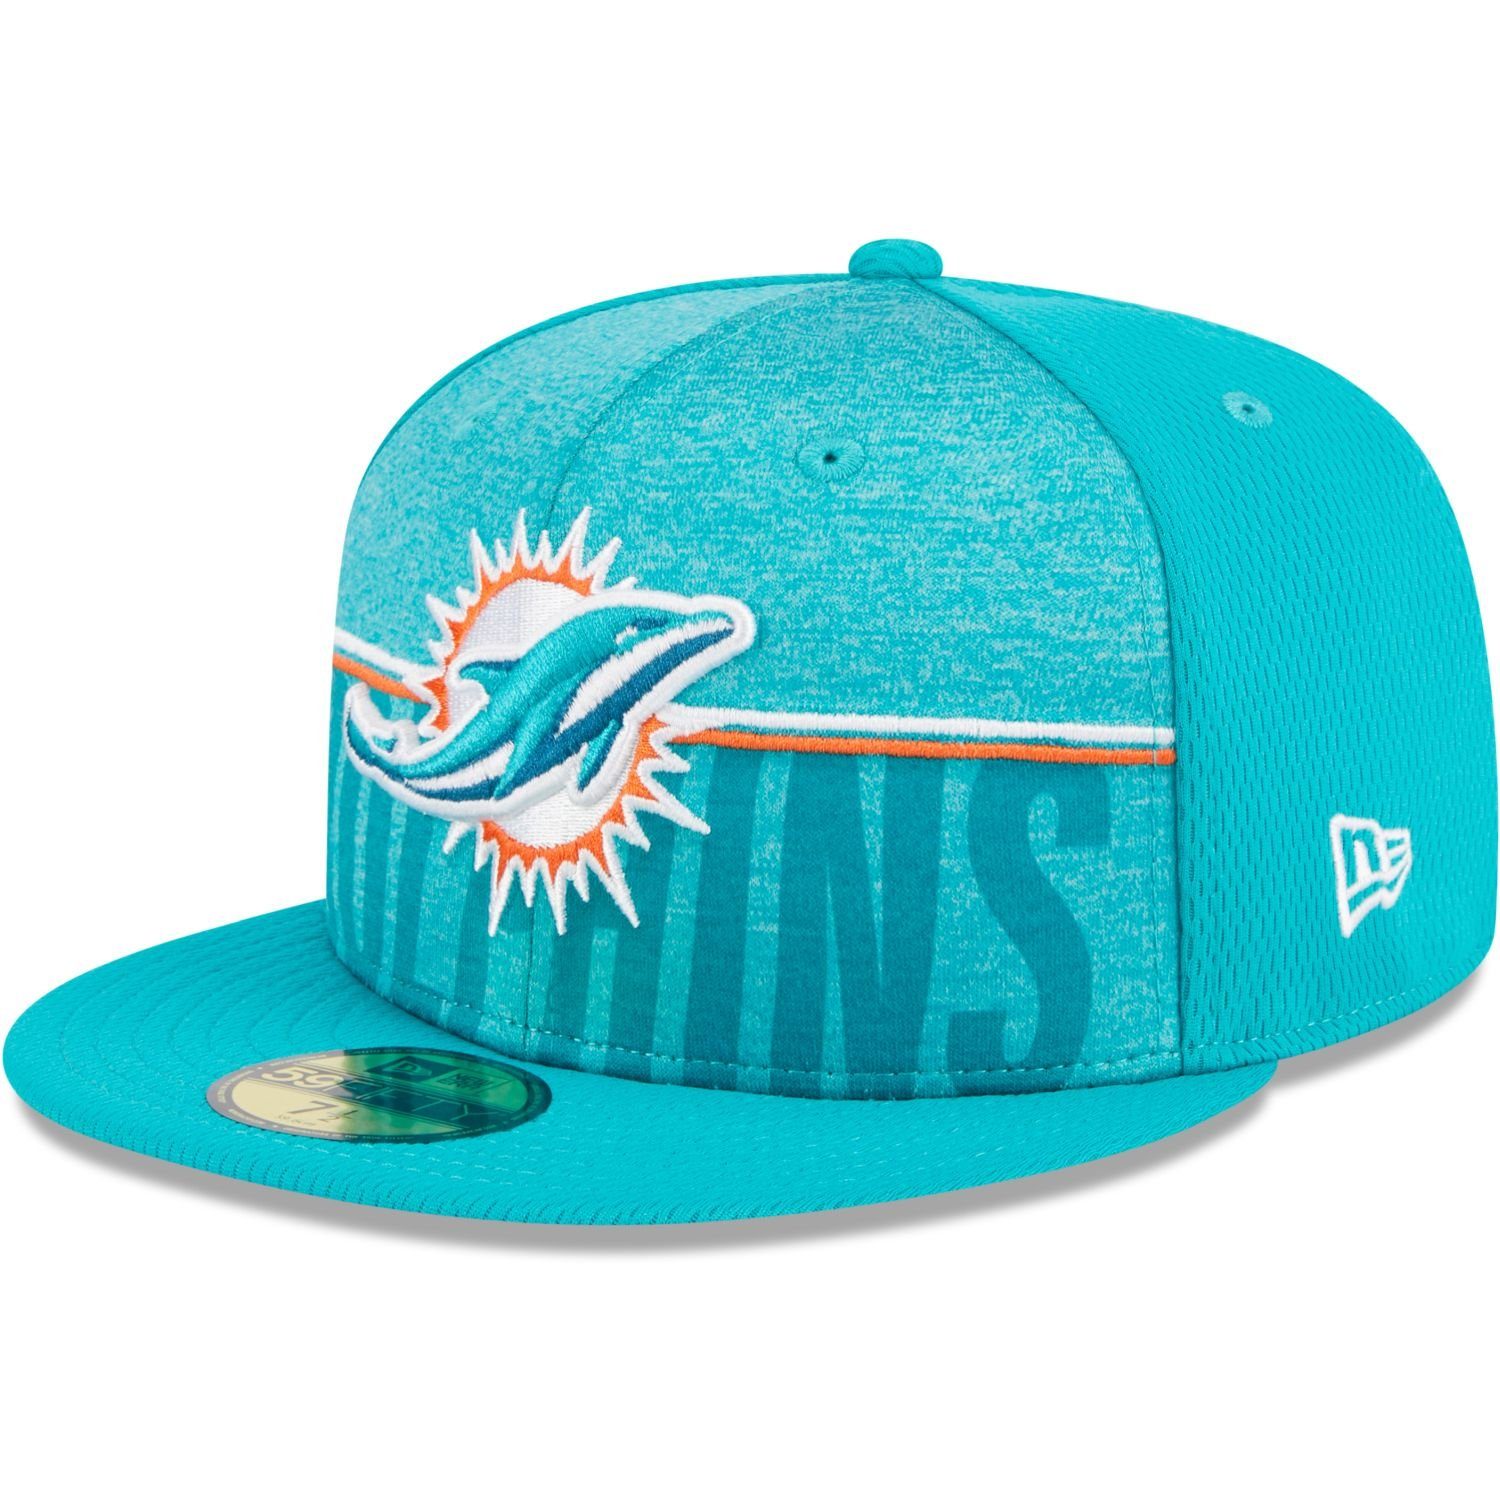 New Era Fitted Cap 59Fifty NFL TRAINING Miami Dolphins